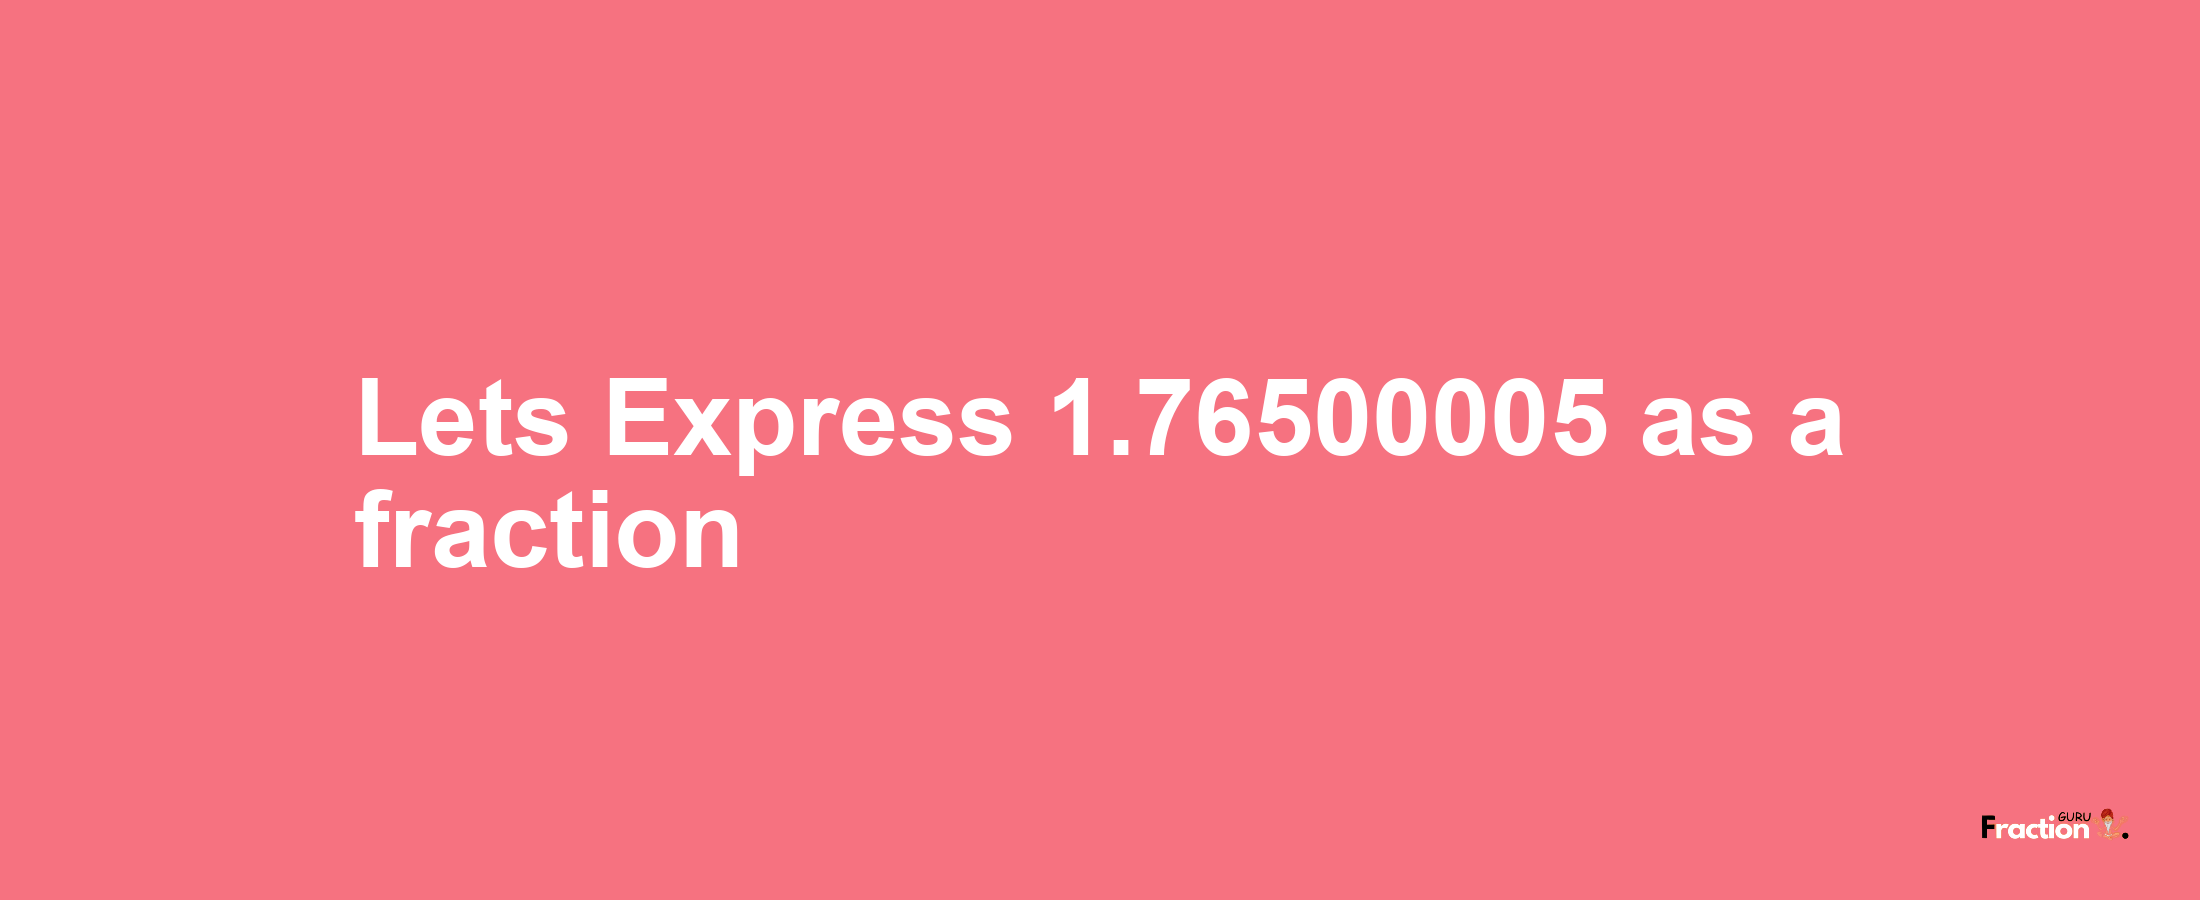 Lets Express 1.76500005 as afraction